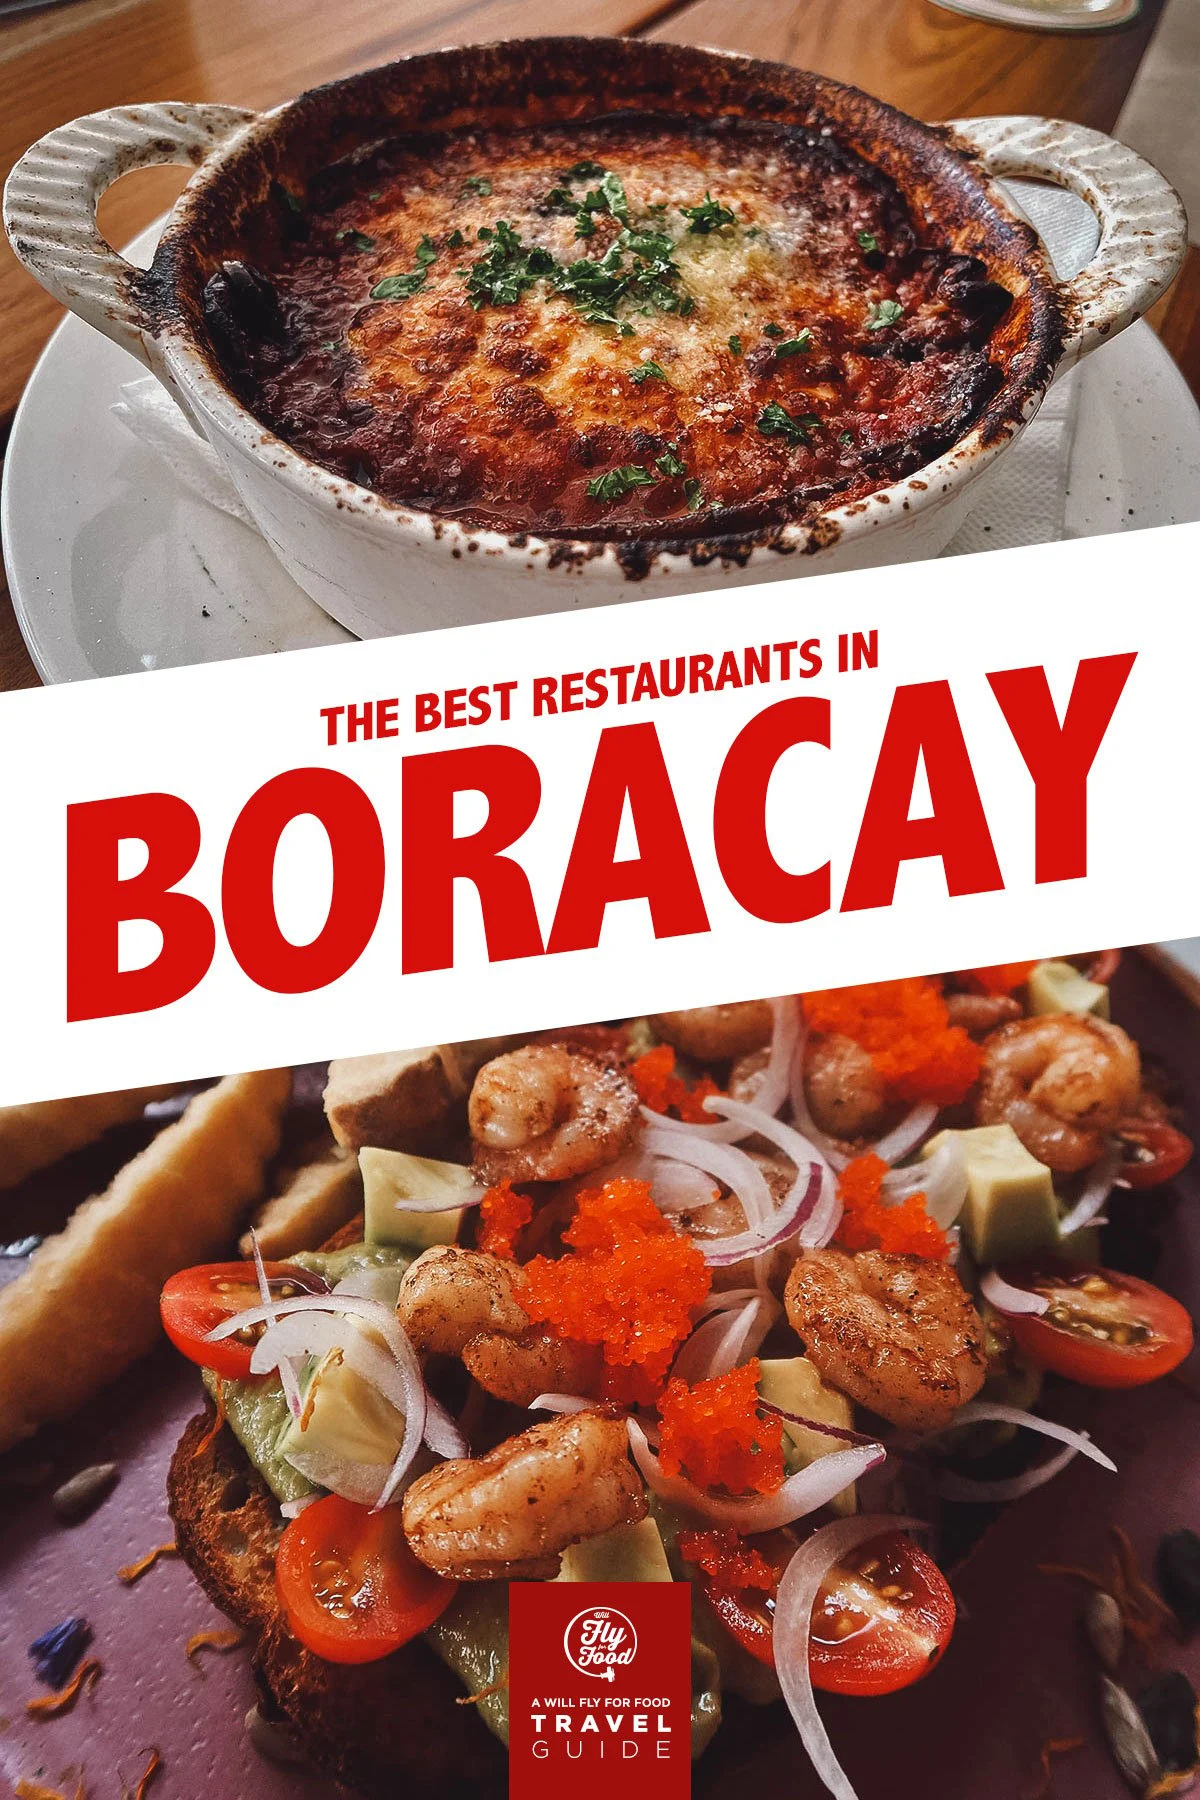 Dishes from restaurants in Boracay, Philippines